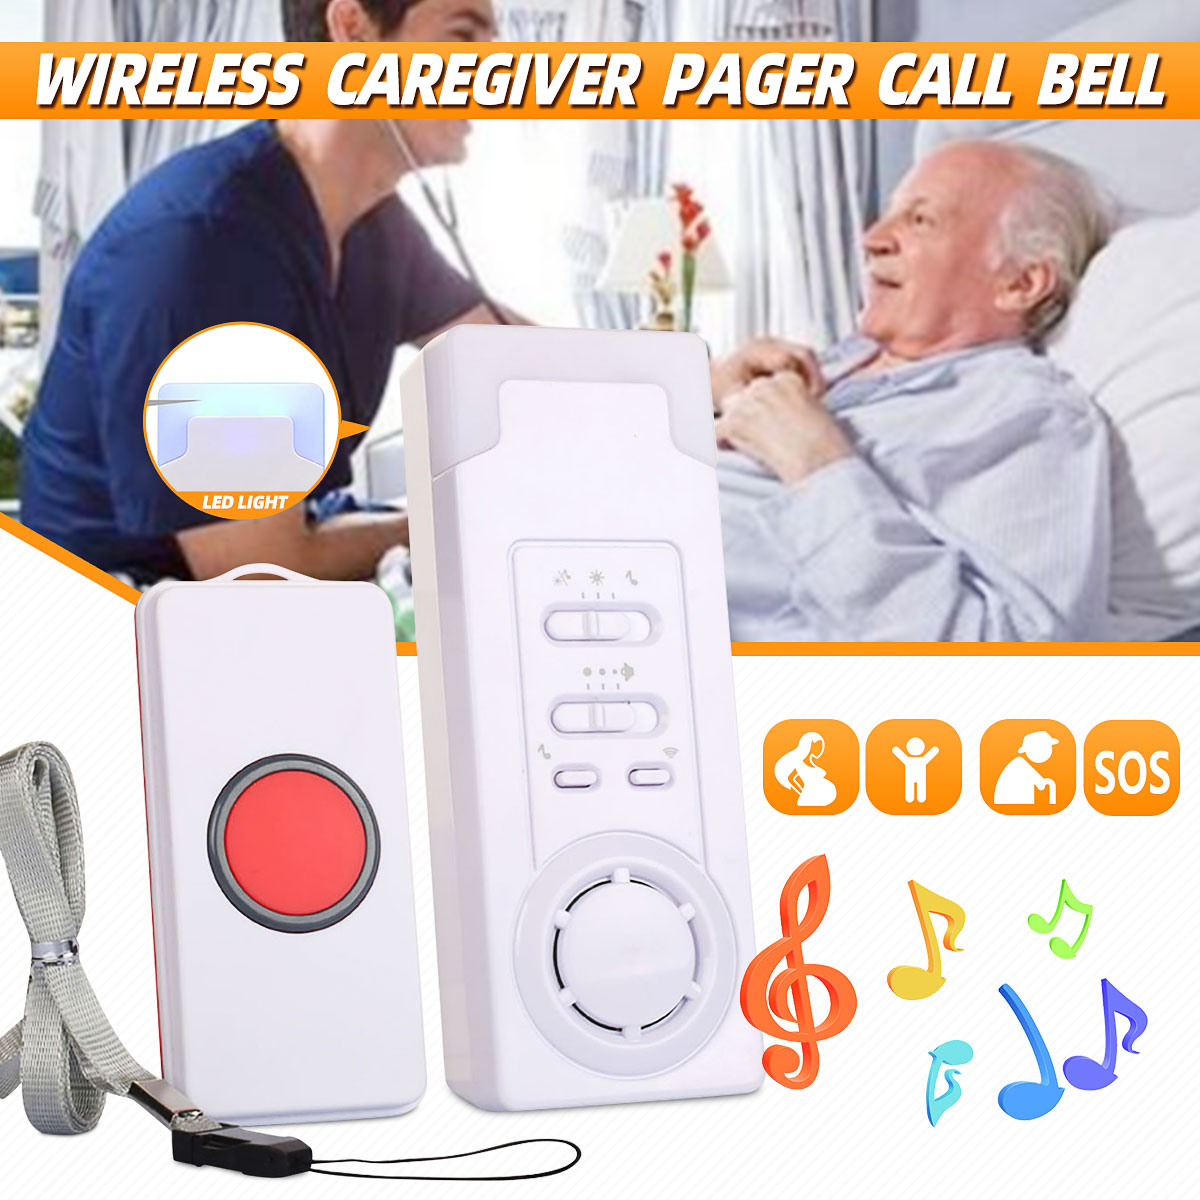 price-history-review-on-caregiver-pager-wireless-home-care-alert